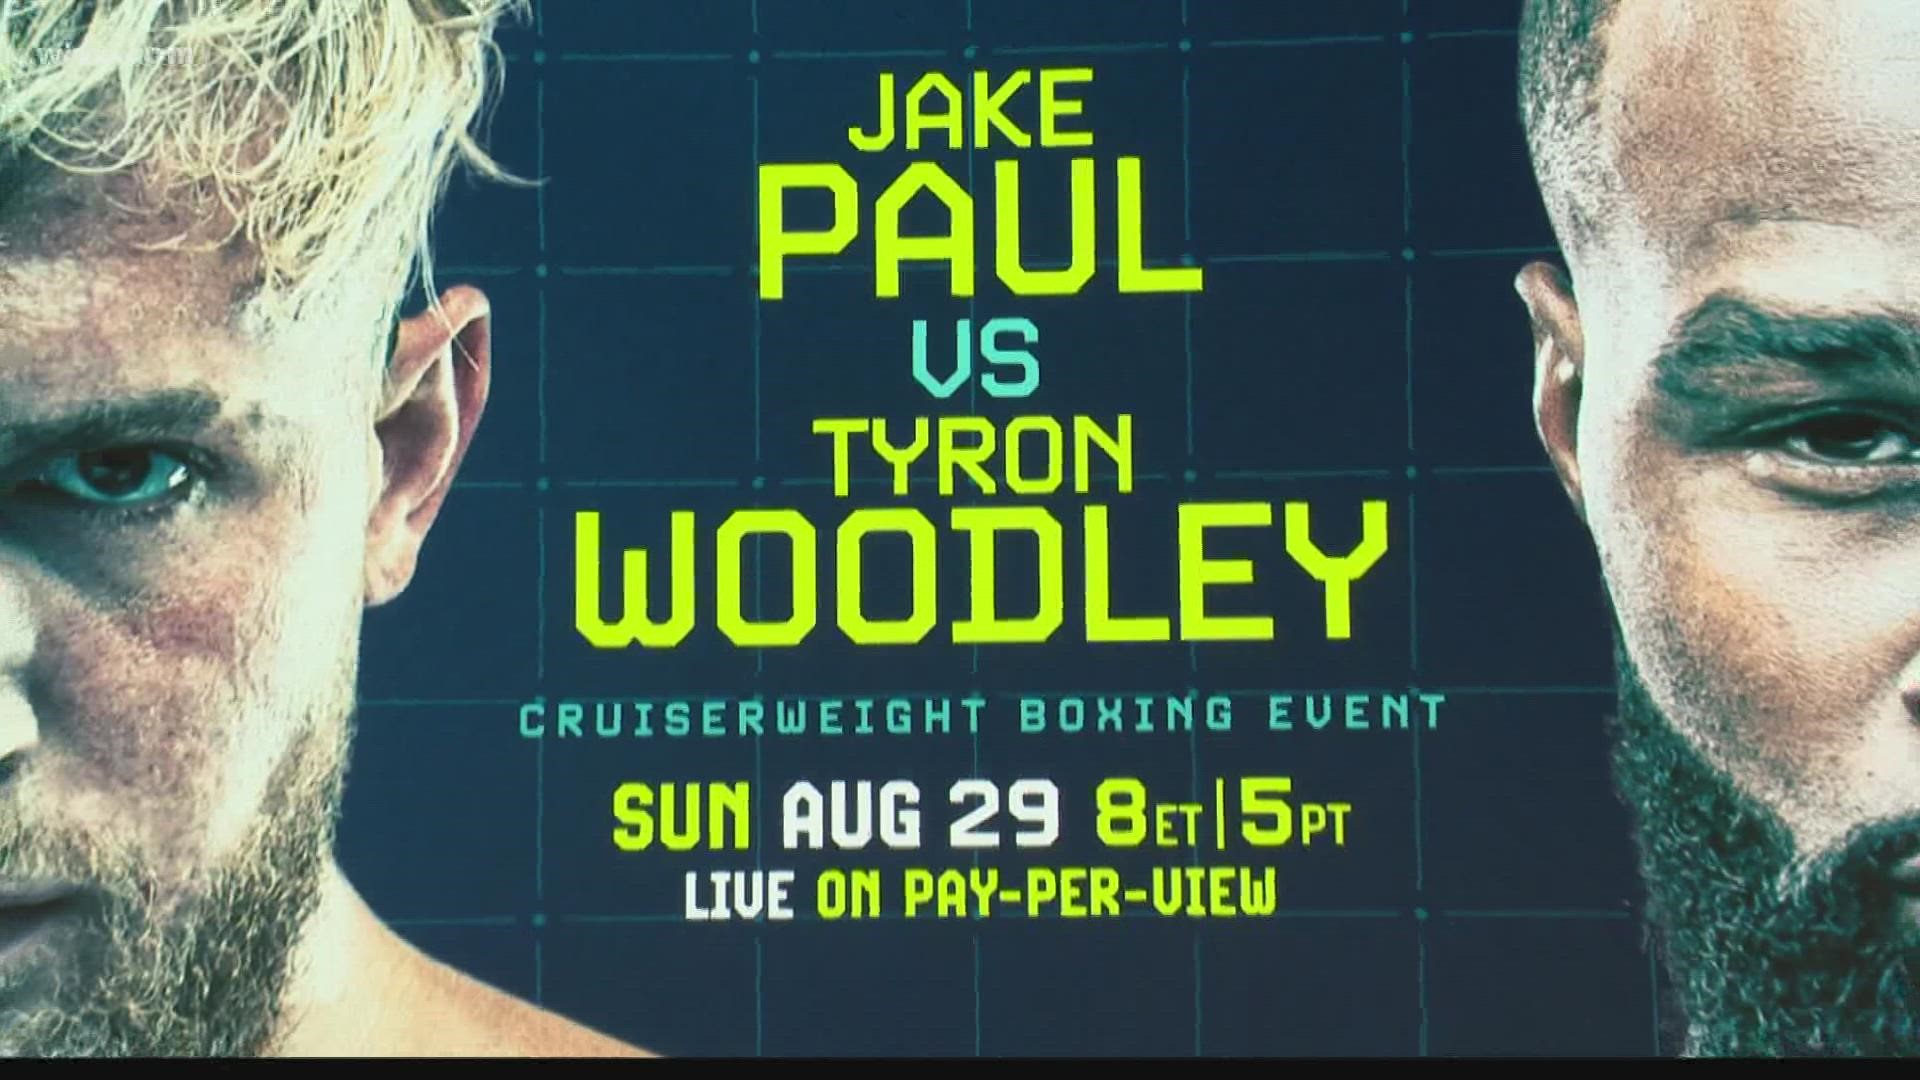 Fight Night! Boxing Match Between Jake Paul and Tyron Woodley Happens Here In Cleveland Tonight.